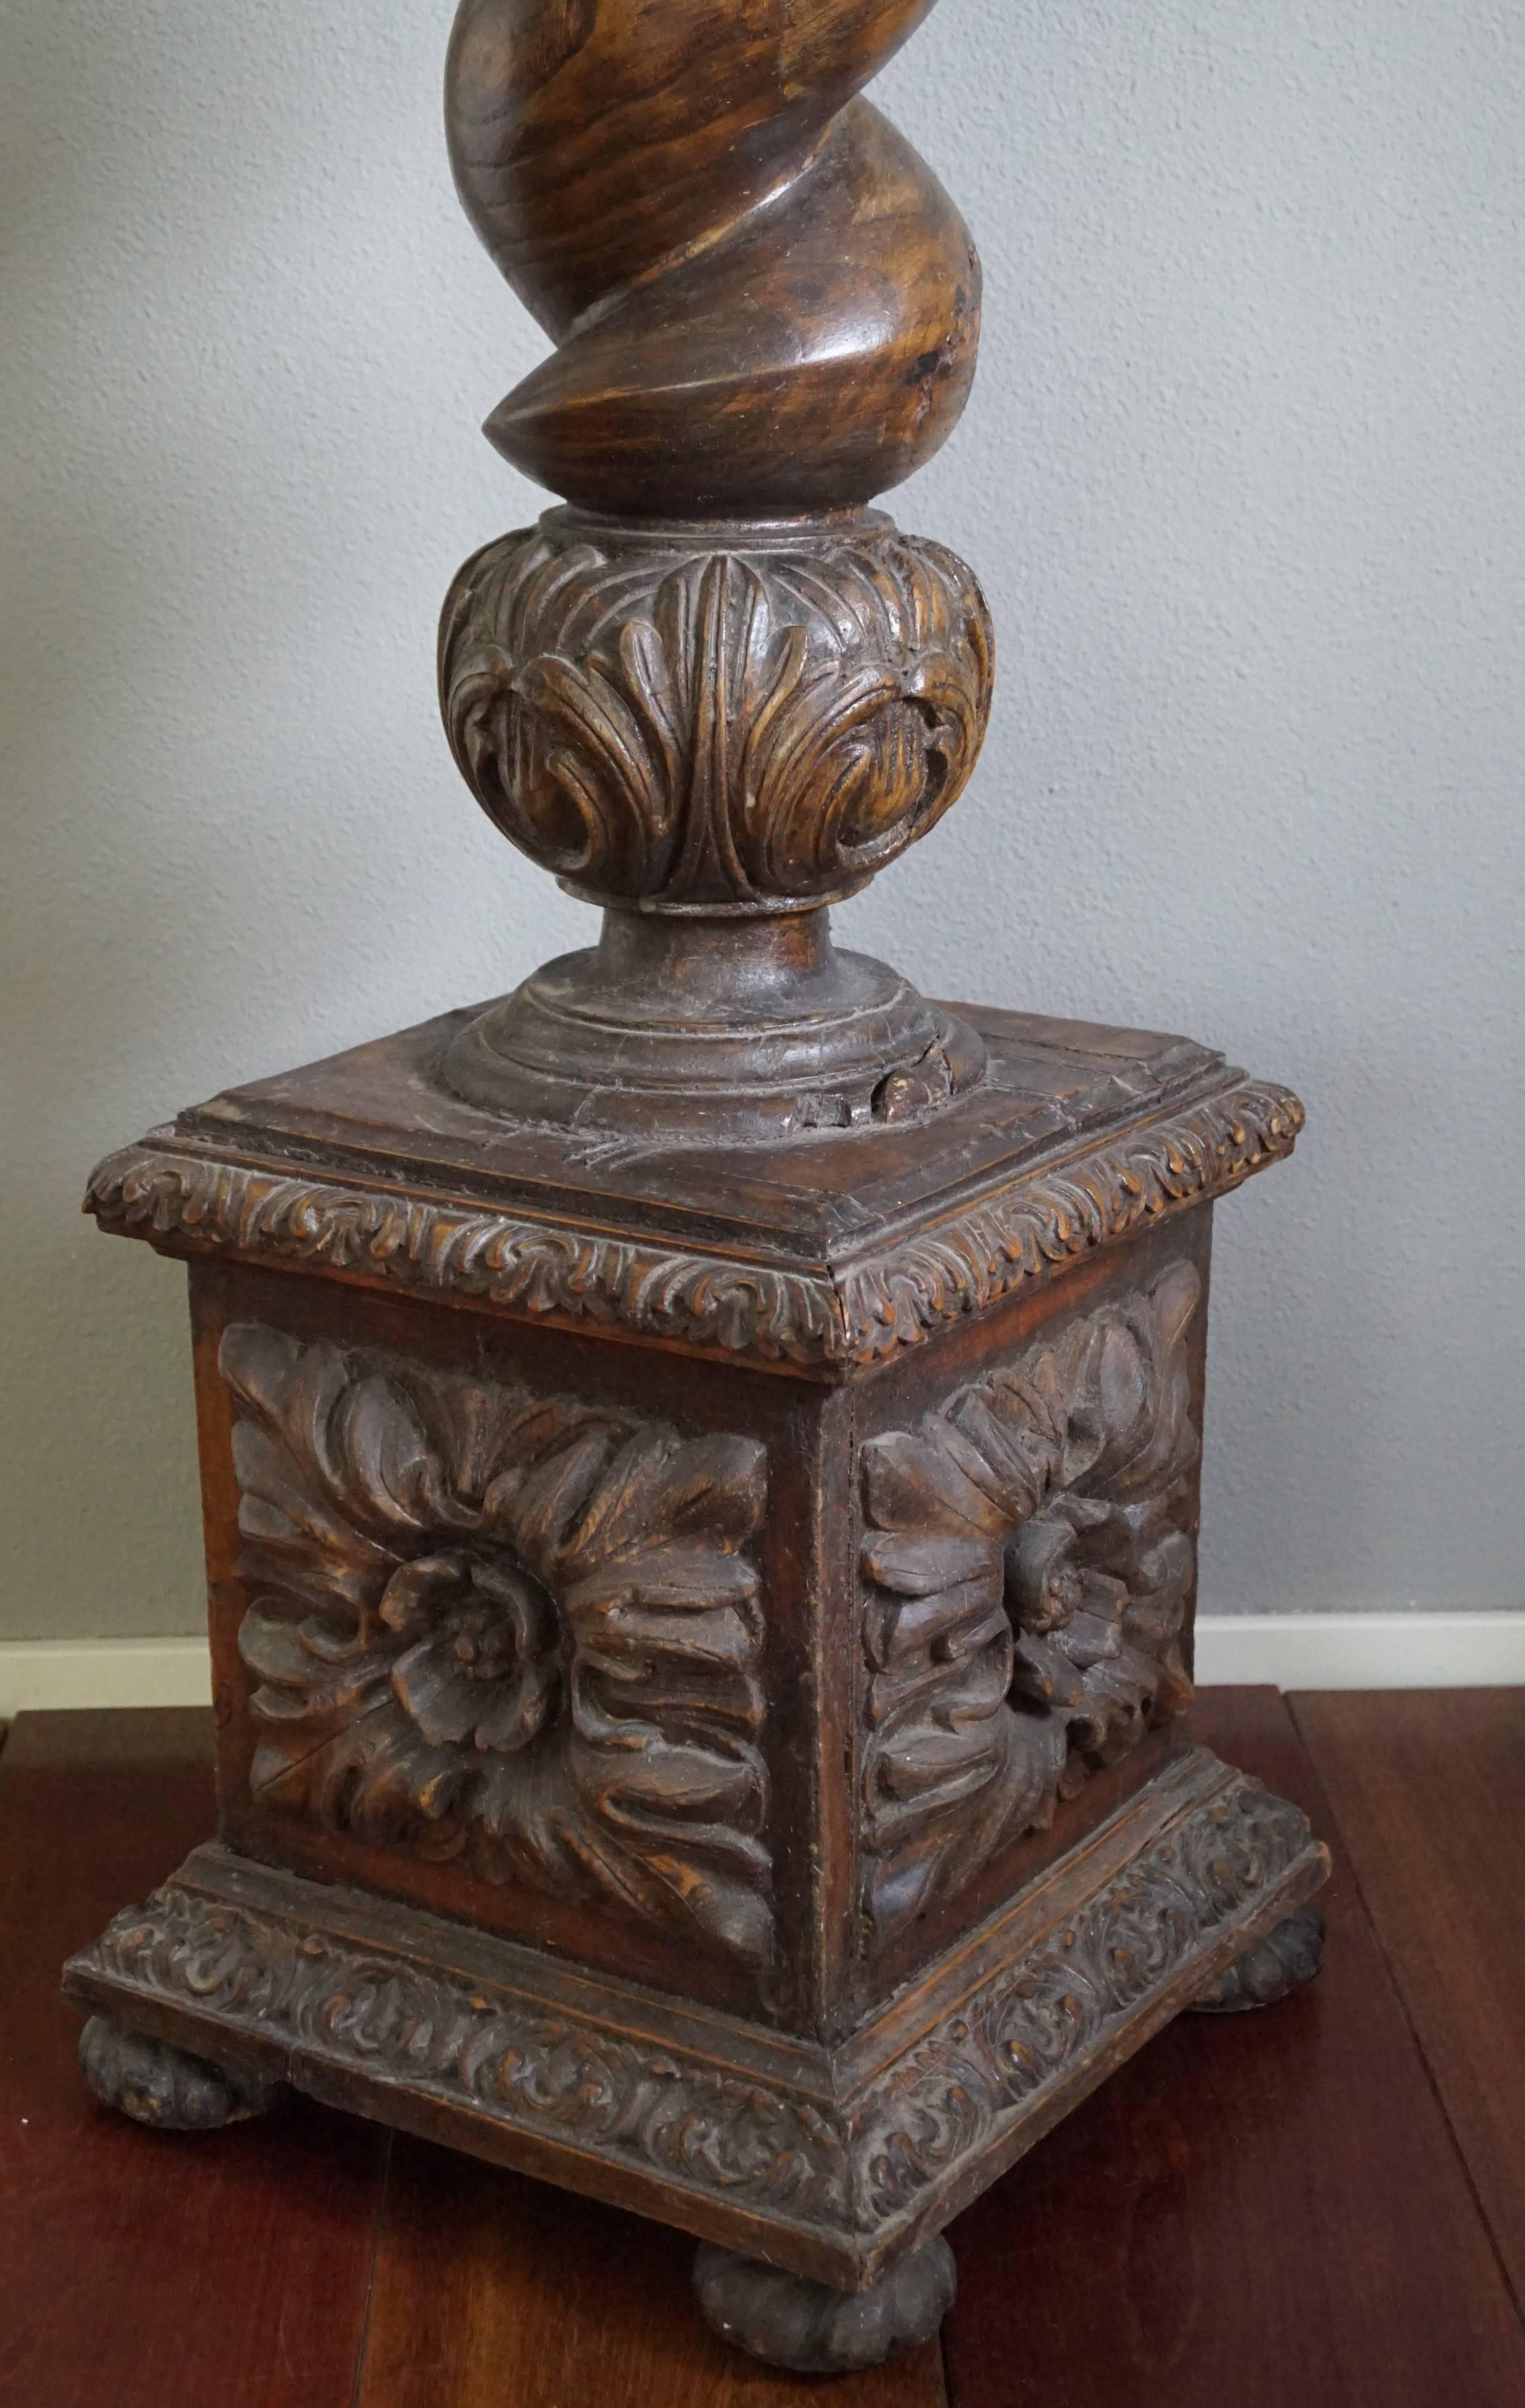 Wood Antique Large & Hand-Carved Mid-19th Century Baroque Pedestal / Sculpture Stand